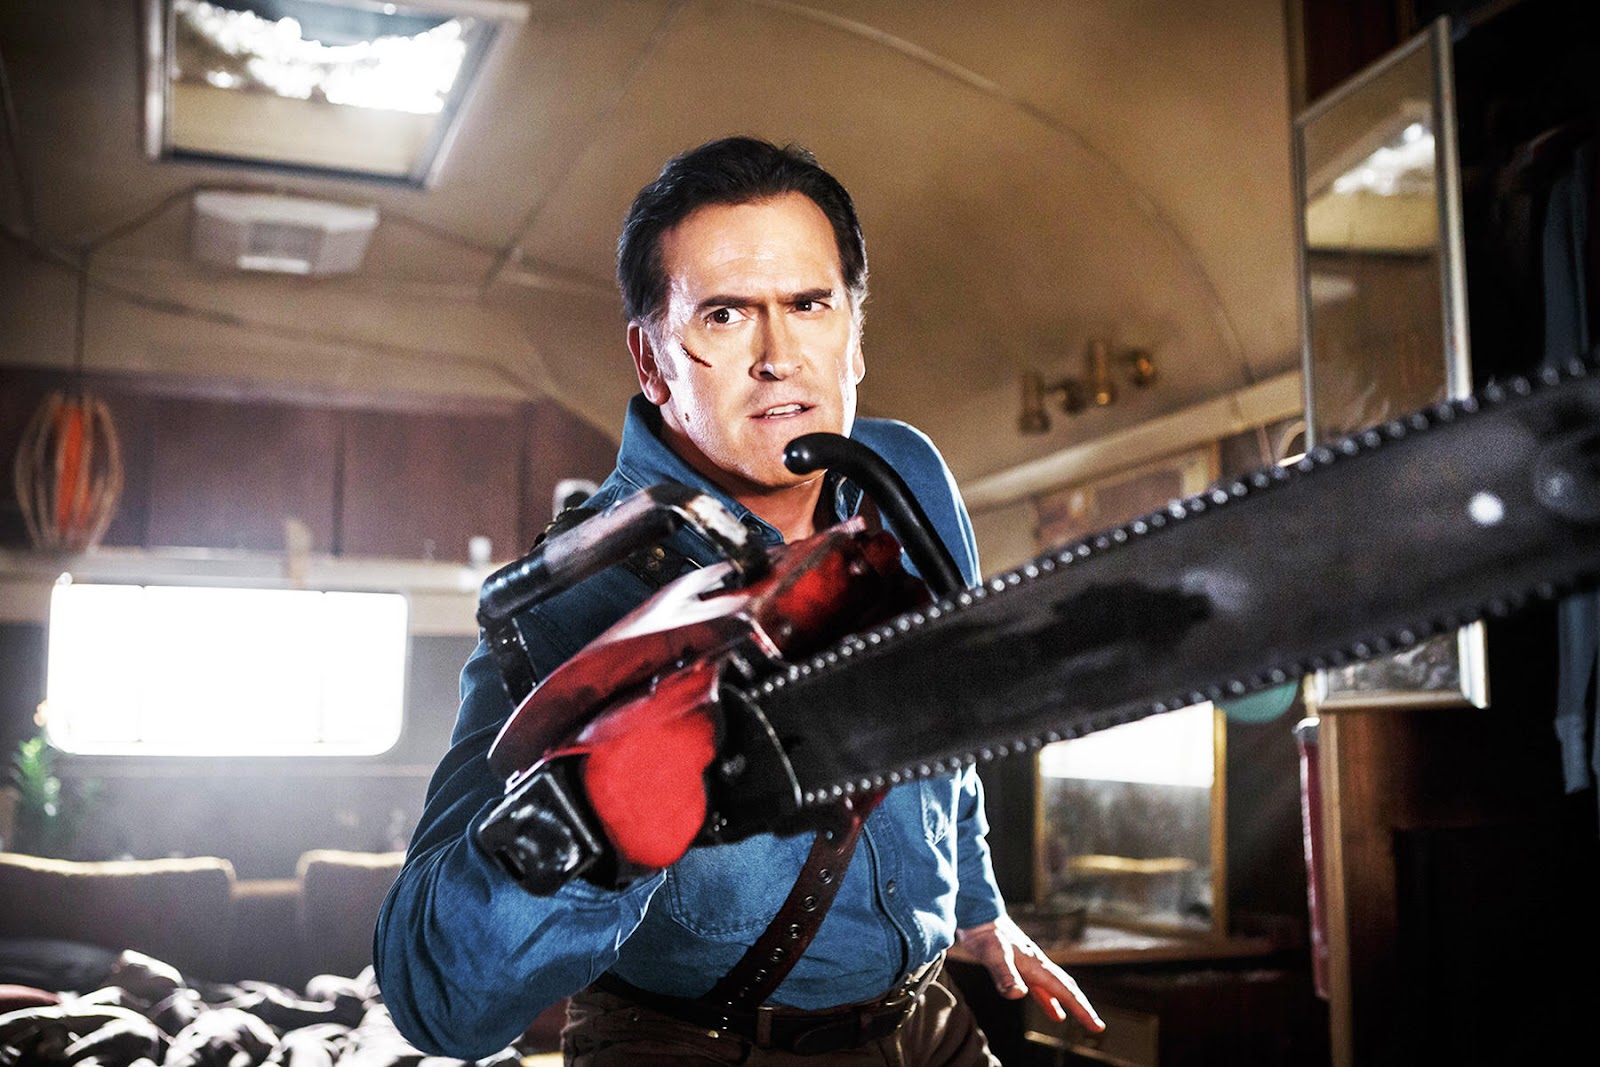 Ash's chain saw from Evil Dead